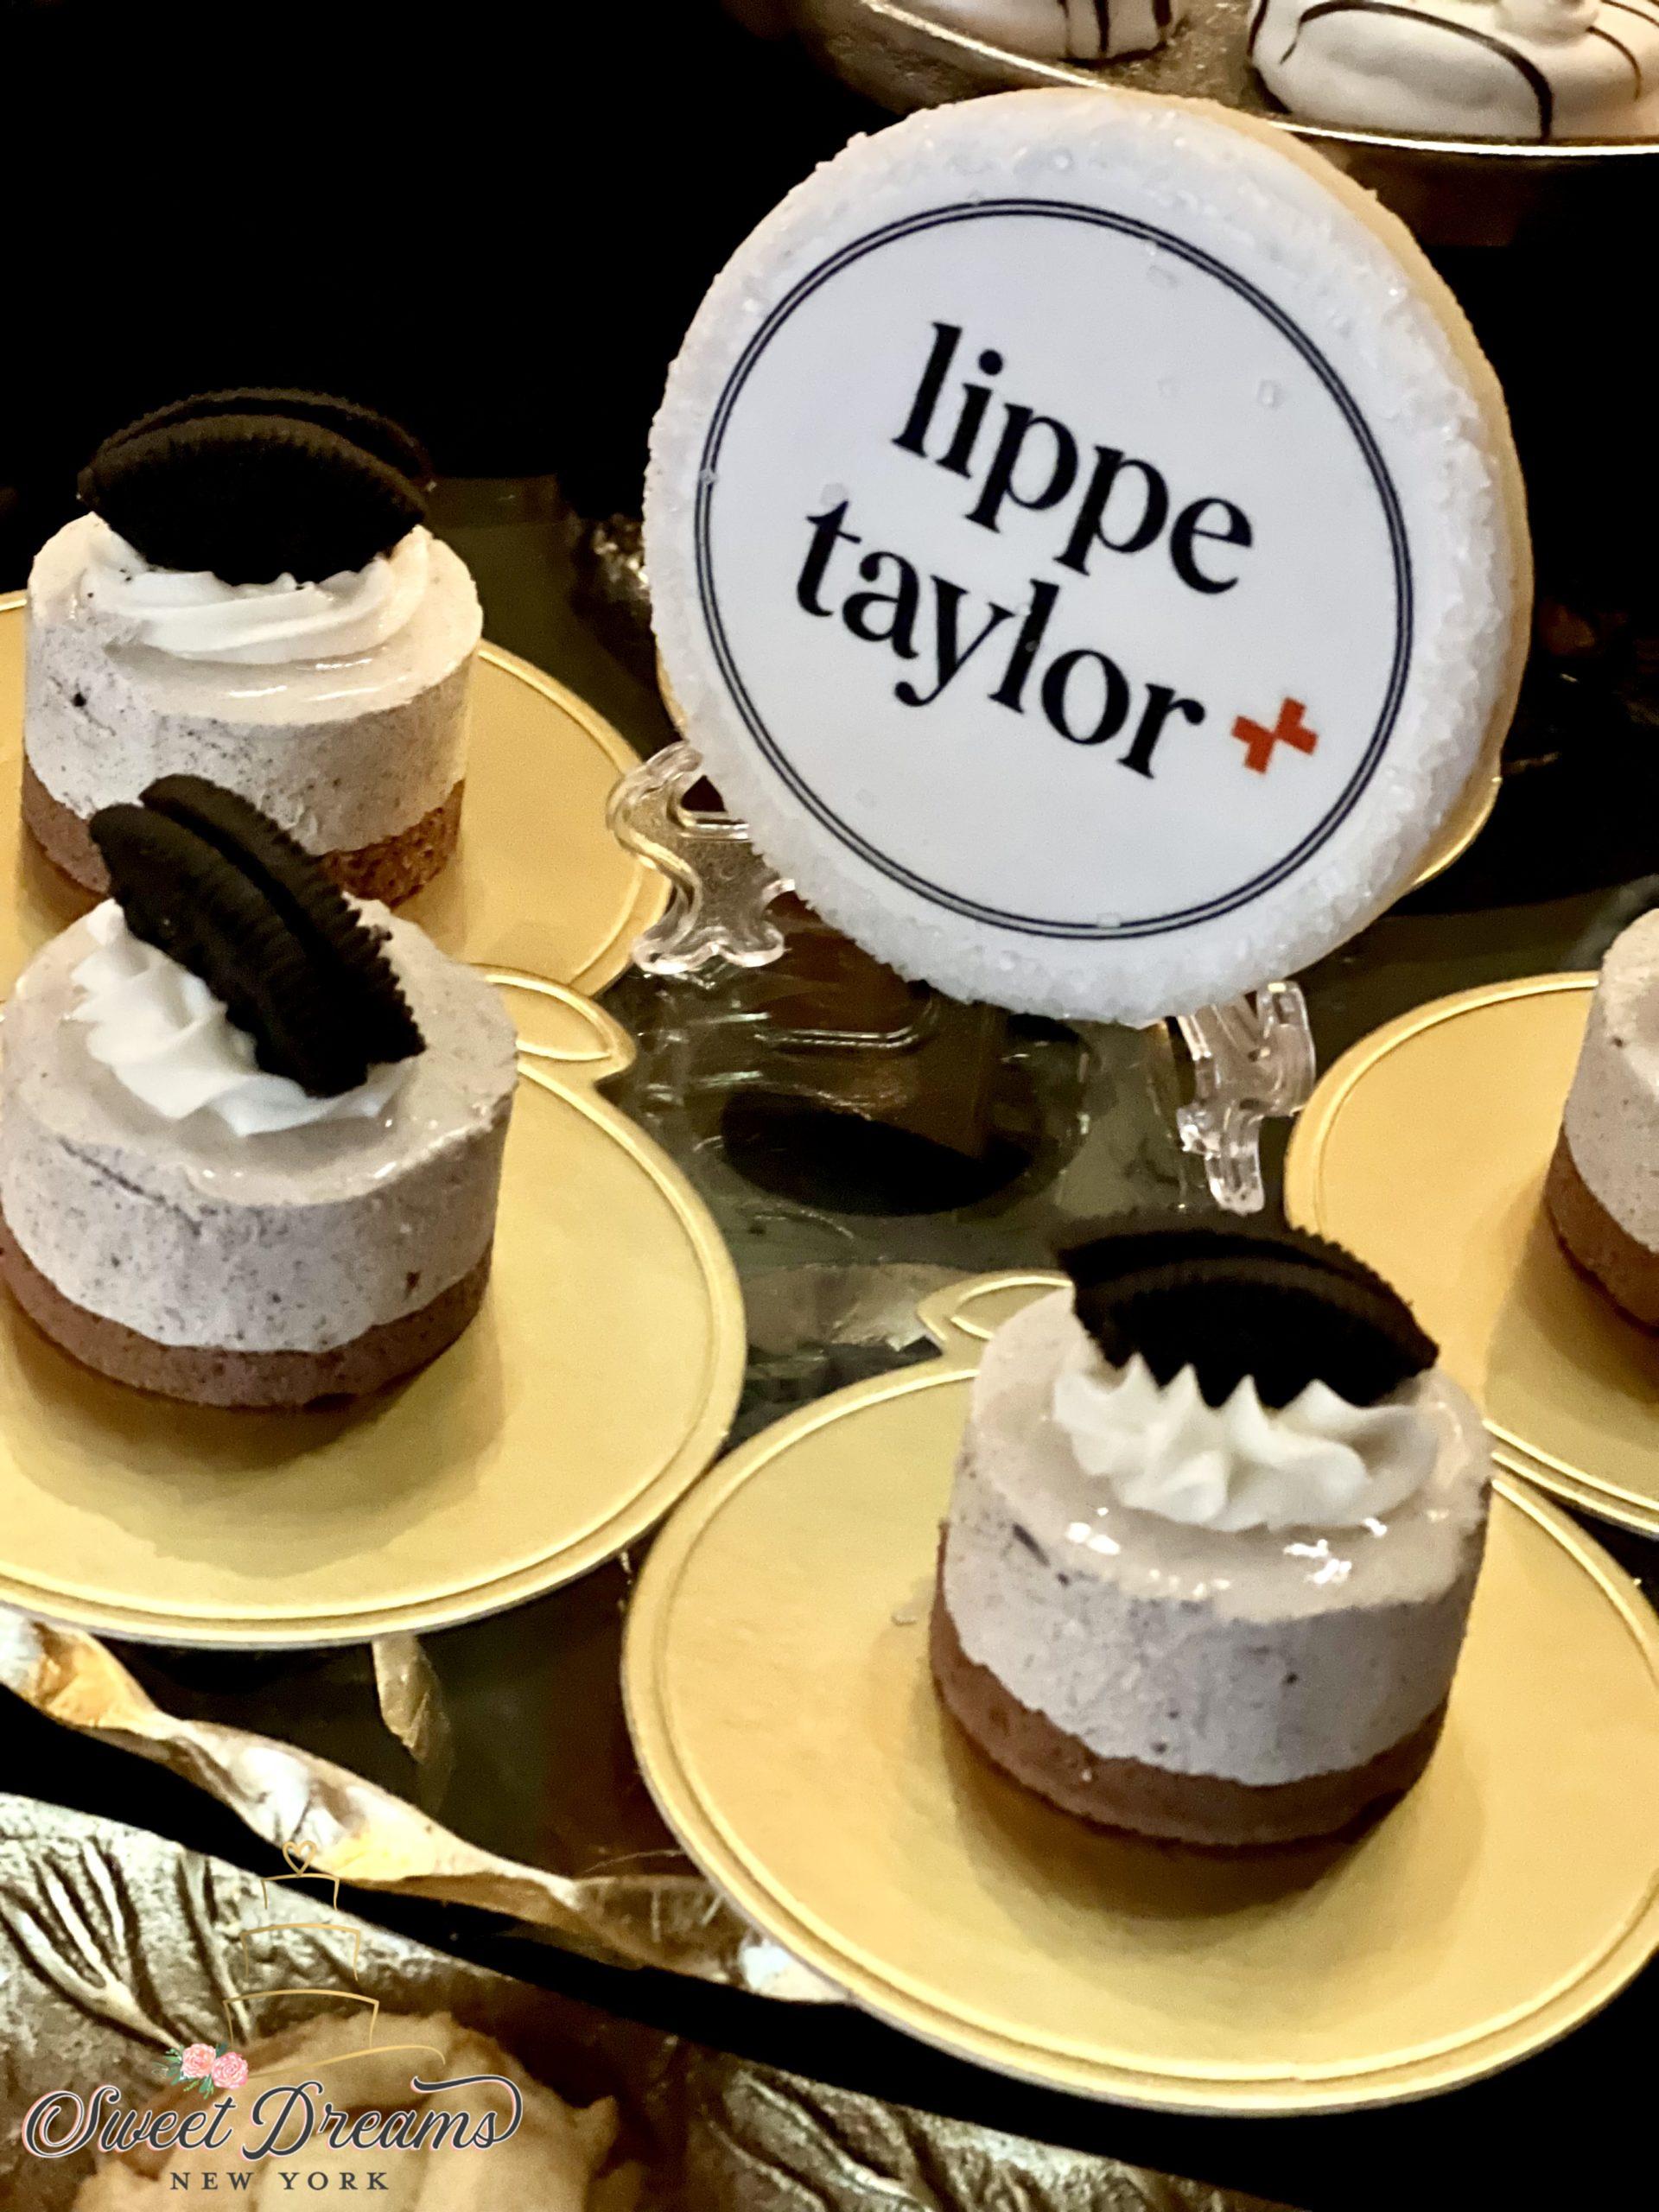 Custom Sugar Cookies edible logo Lippe Taylor event catering NYC Long Island by Sweet Dreams NY